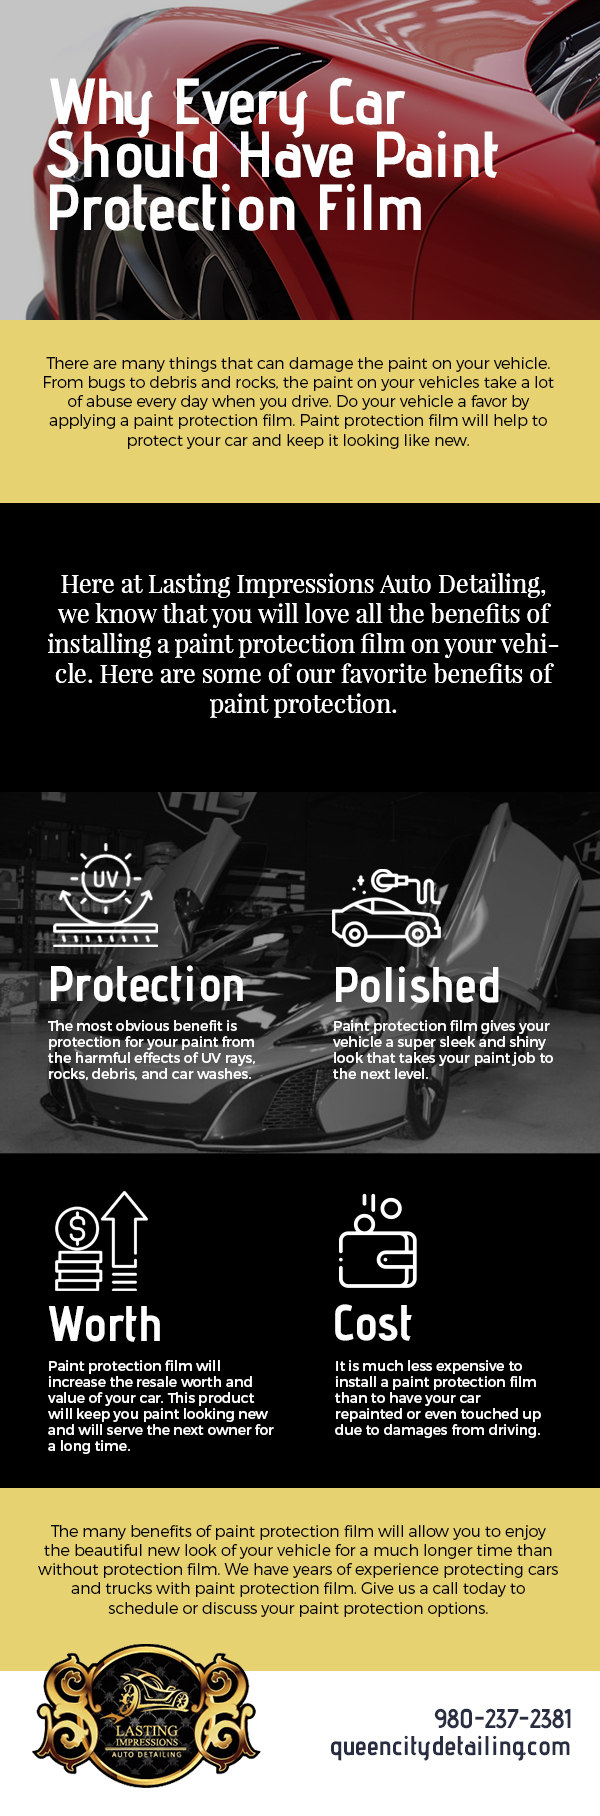 Why Every Car Should Have Paint Protection Film [infographic]